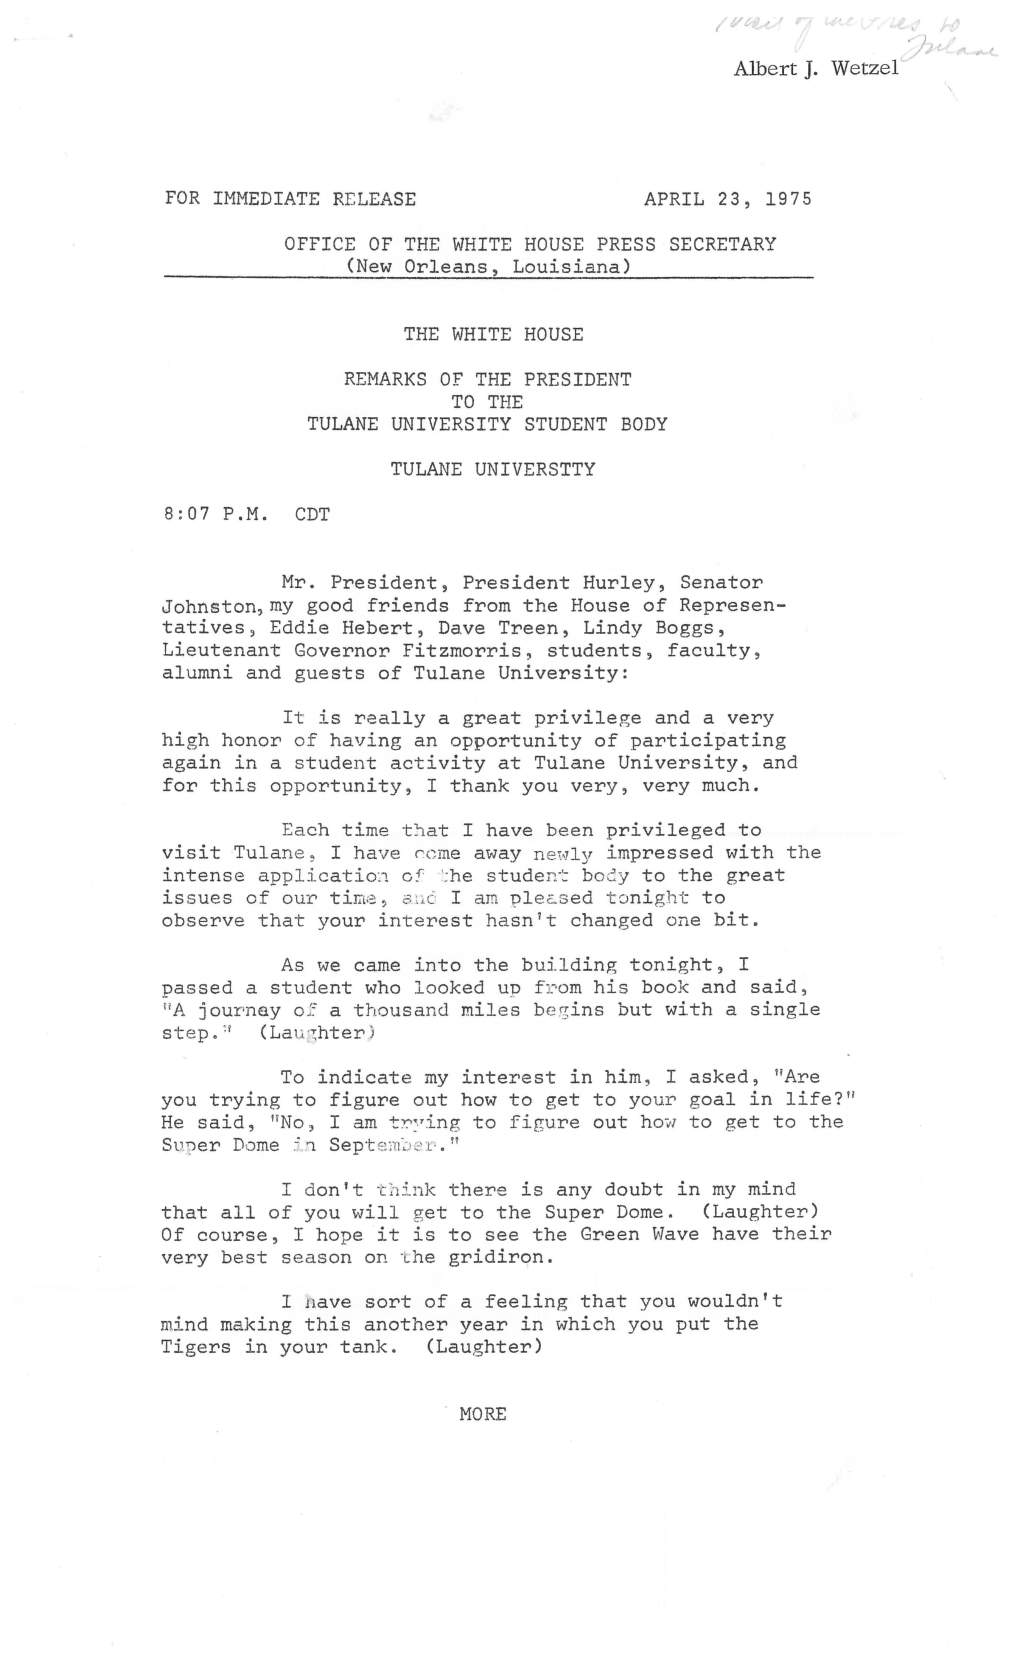 For Immediate Release April 23, 1975 Office of the White House Press Secretary the White House Remarks of the President to the T